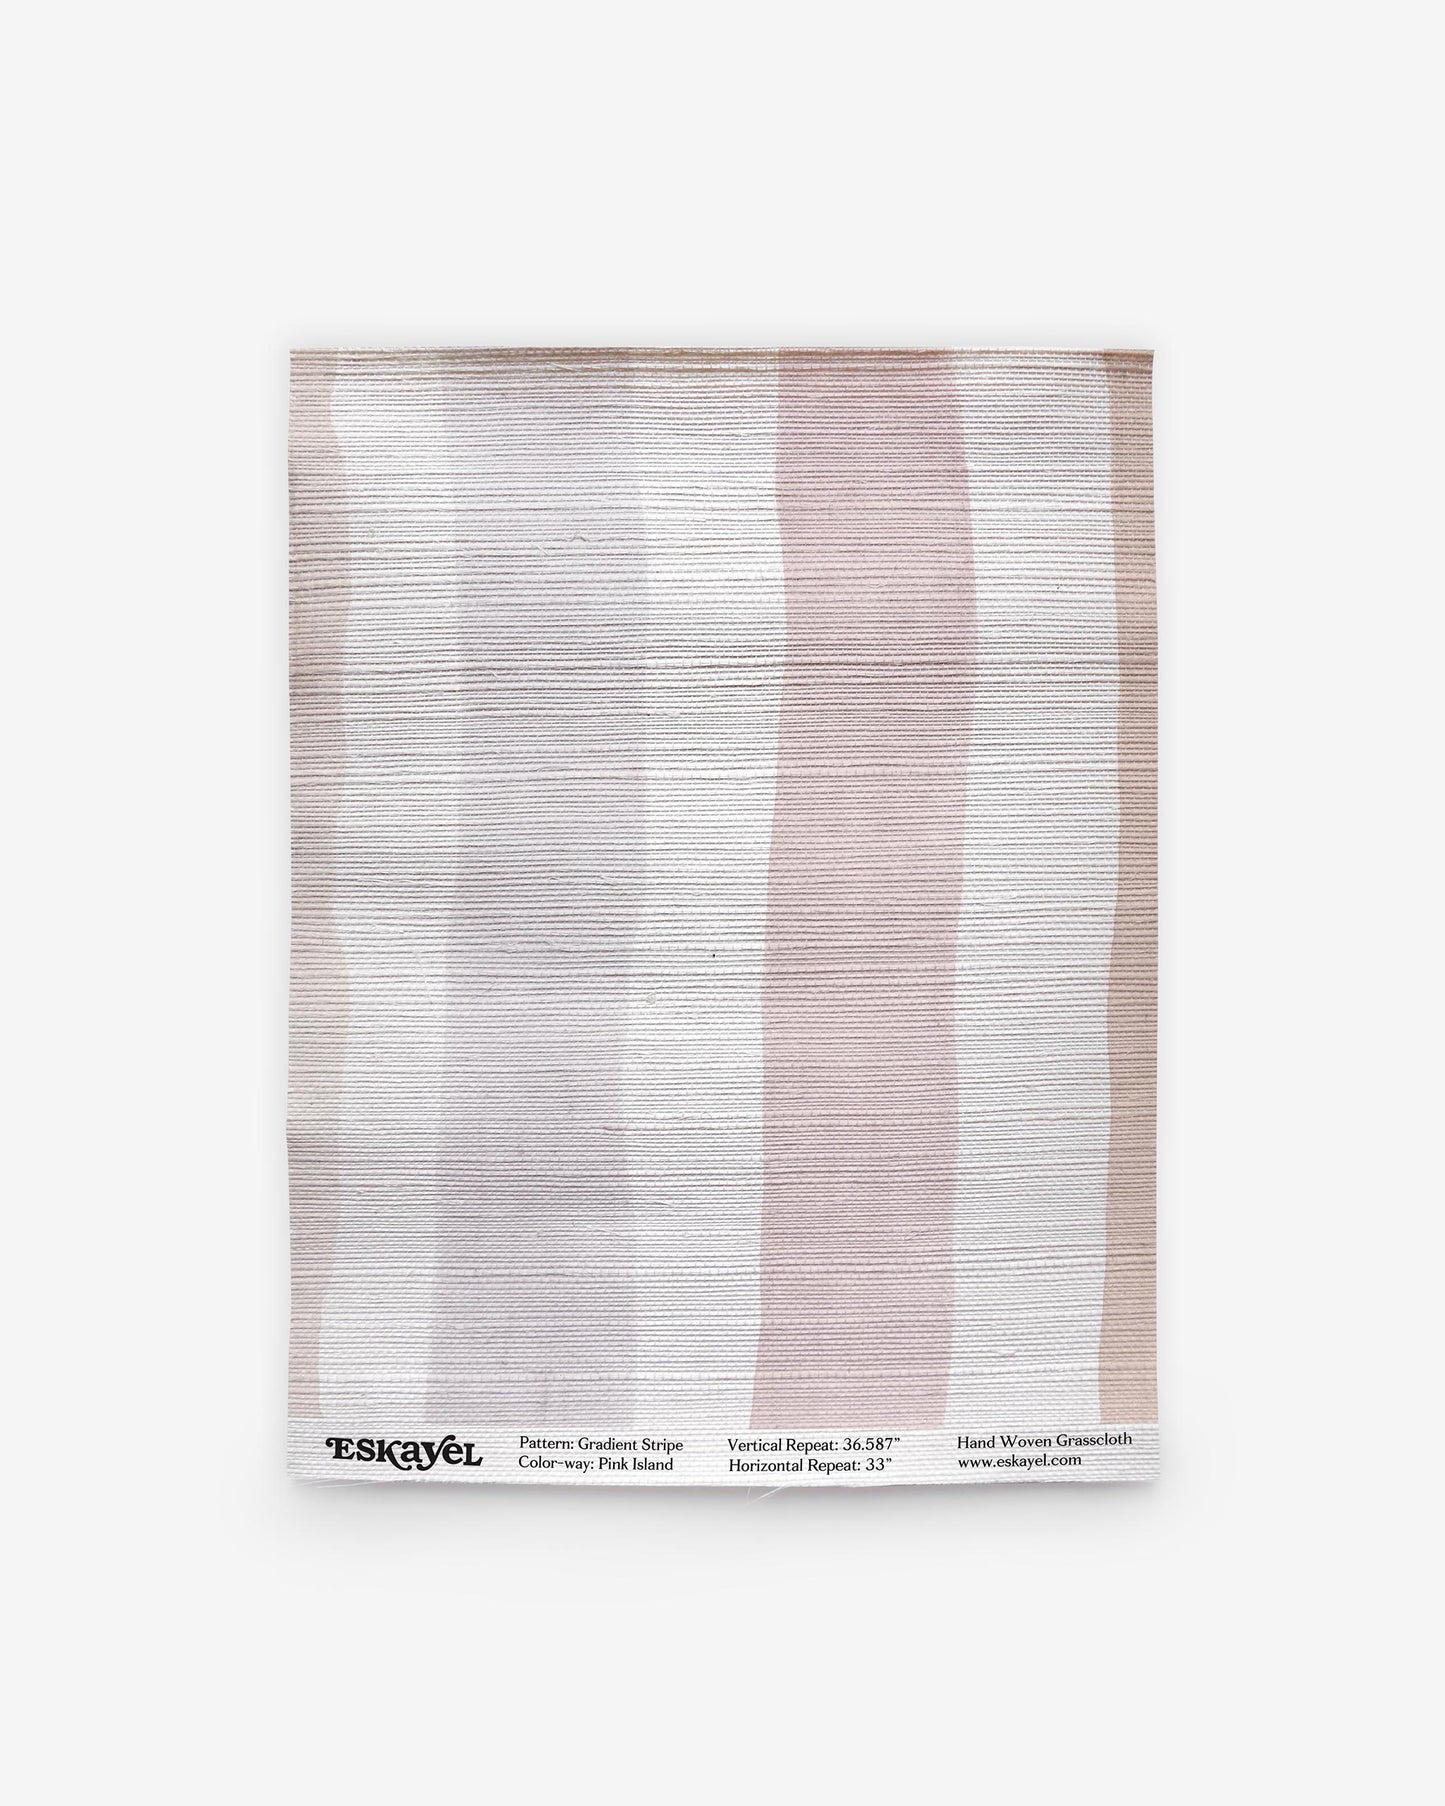 A pink and white striped Gradient Stripe Grasscloth towel on a white background.